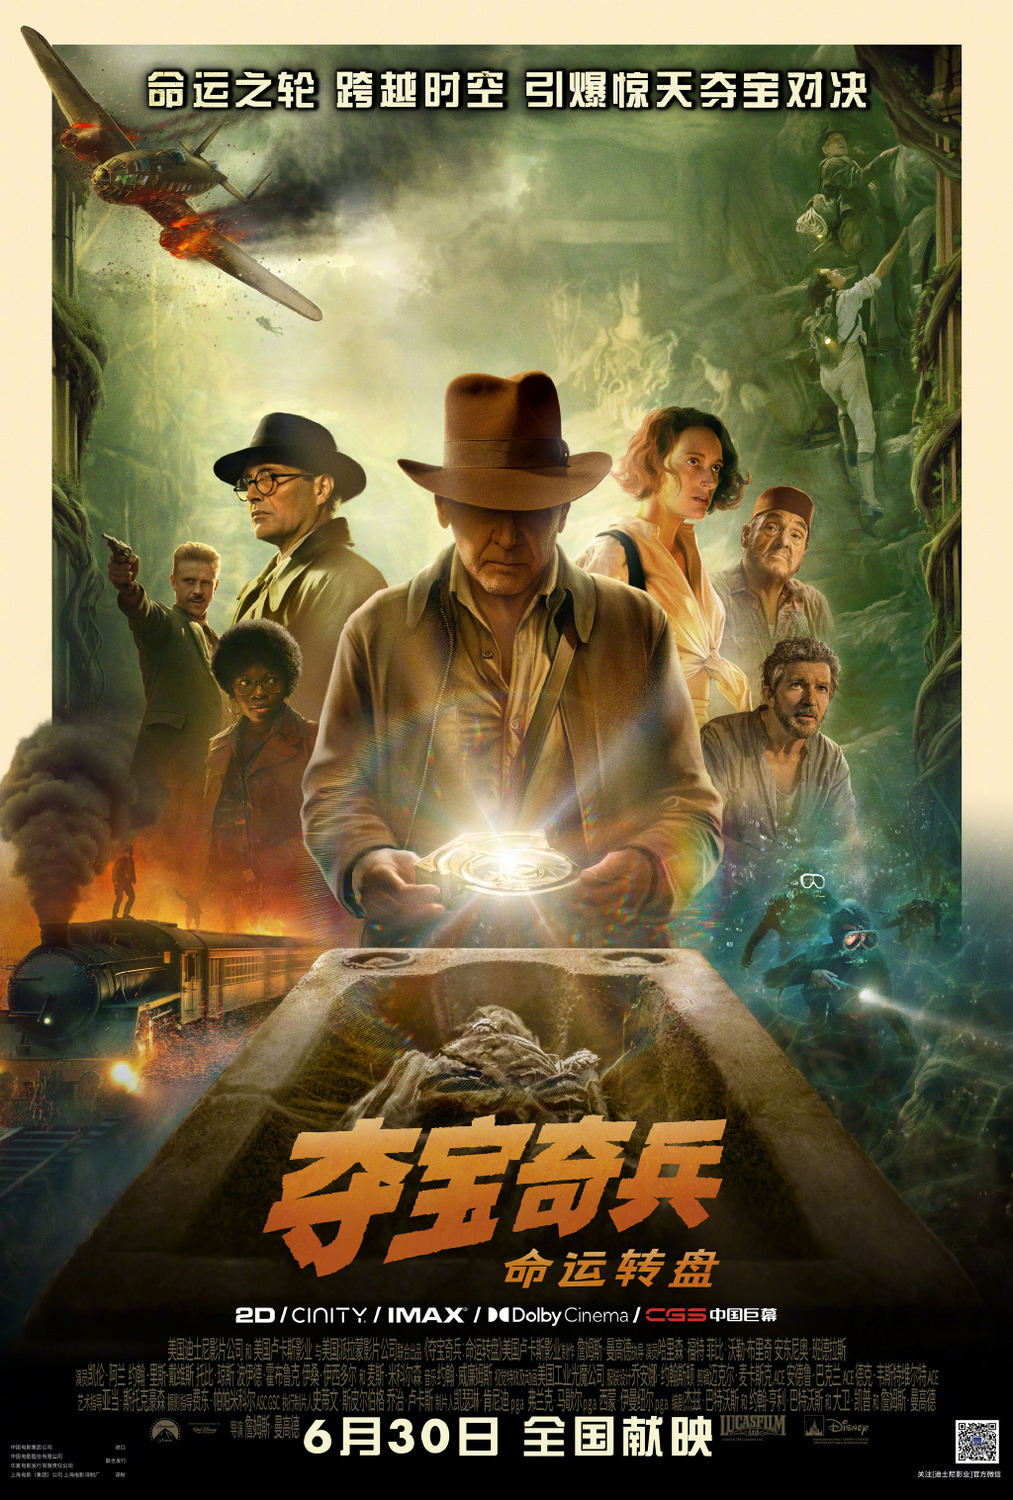 Indiana Jones and the Dial of Destiny hits a high on opening